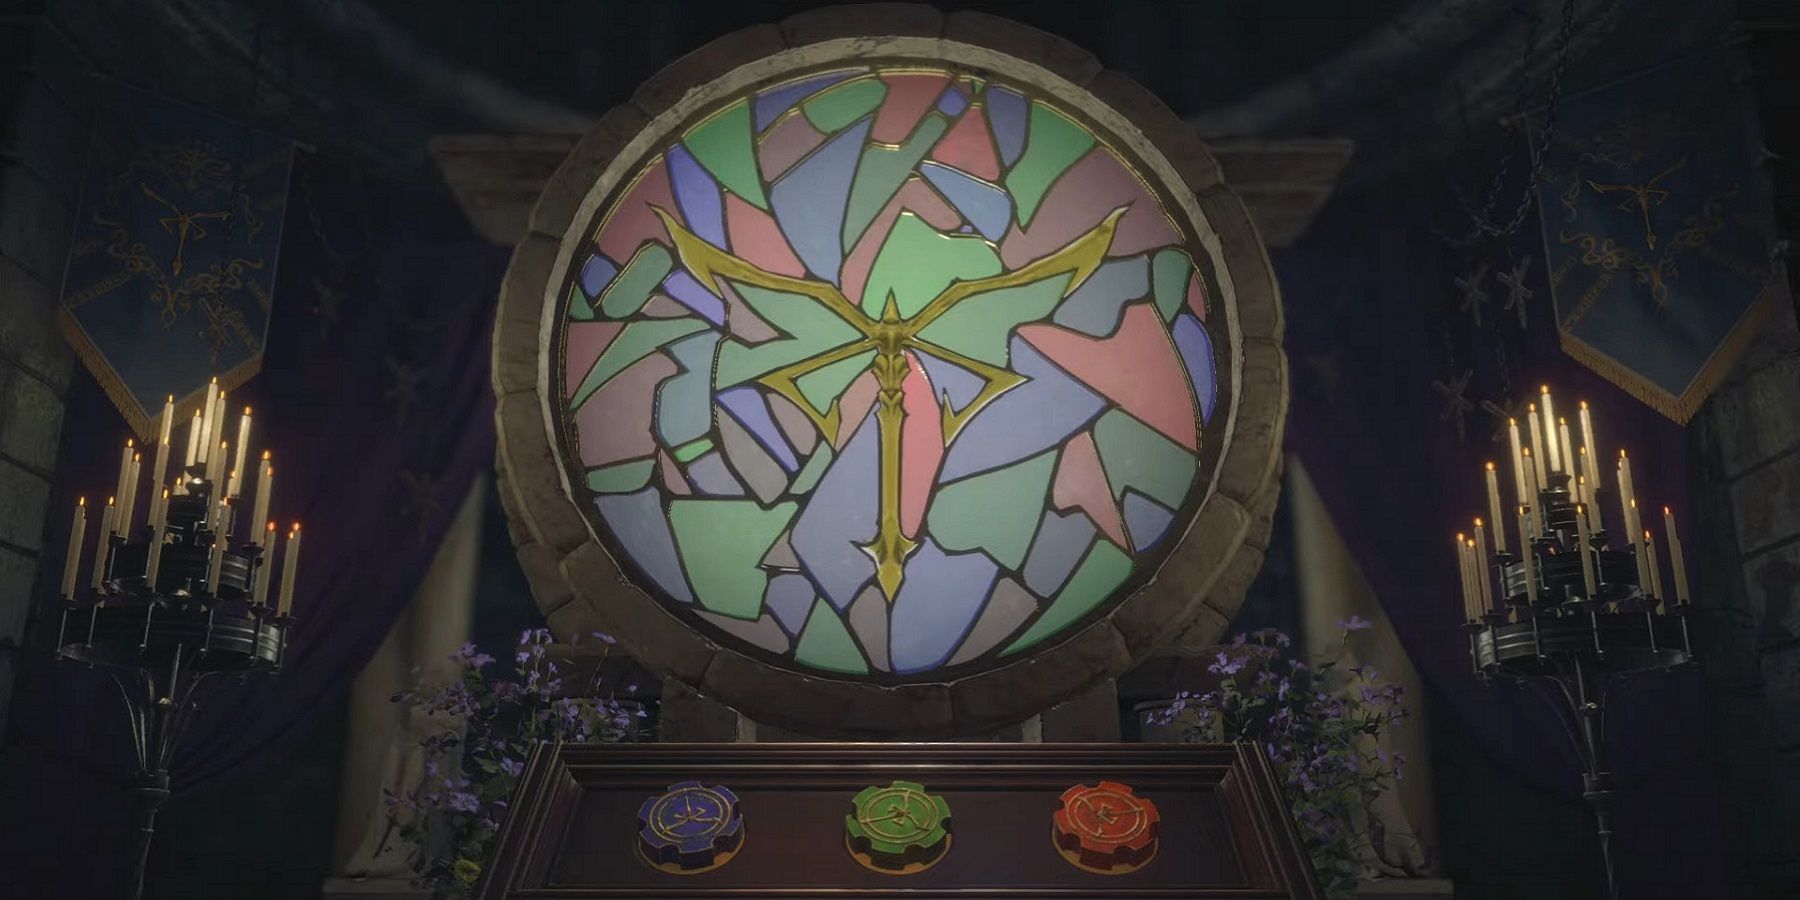 The Colored Window puzzle in the church in Resident Evil 4.